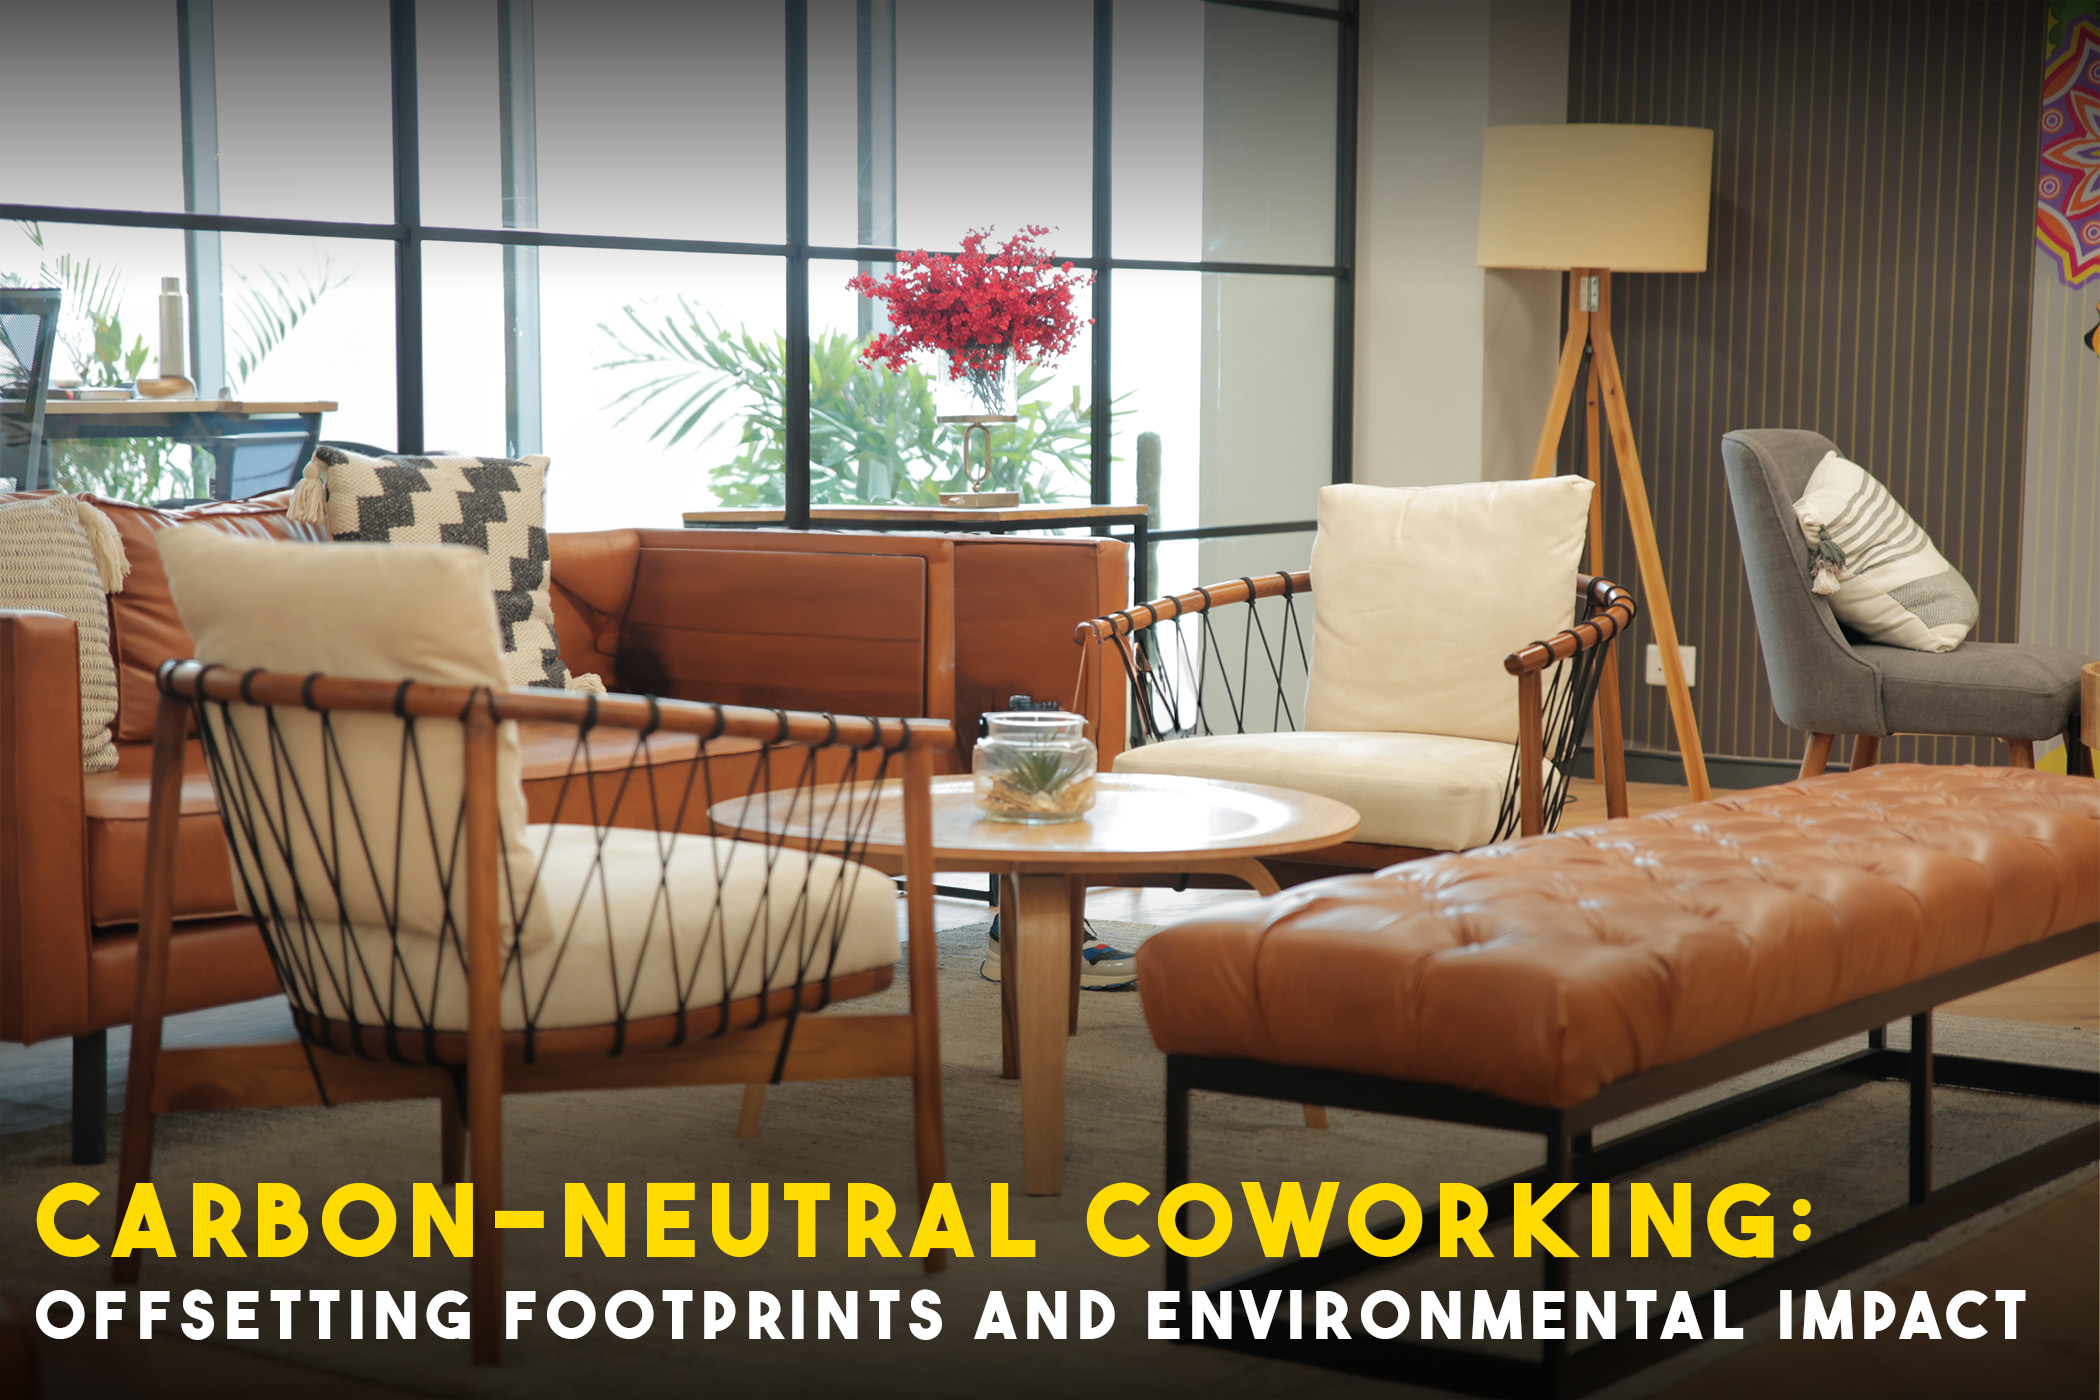 Carbon neutral coworking | Venture X India carbon neutral | sustainable coworking | environmental friendly coworking